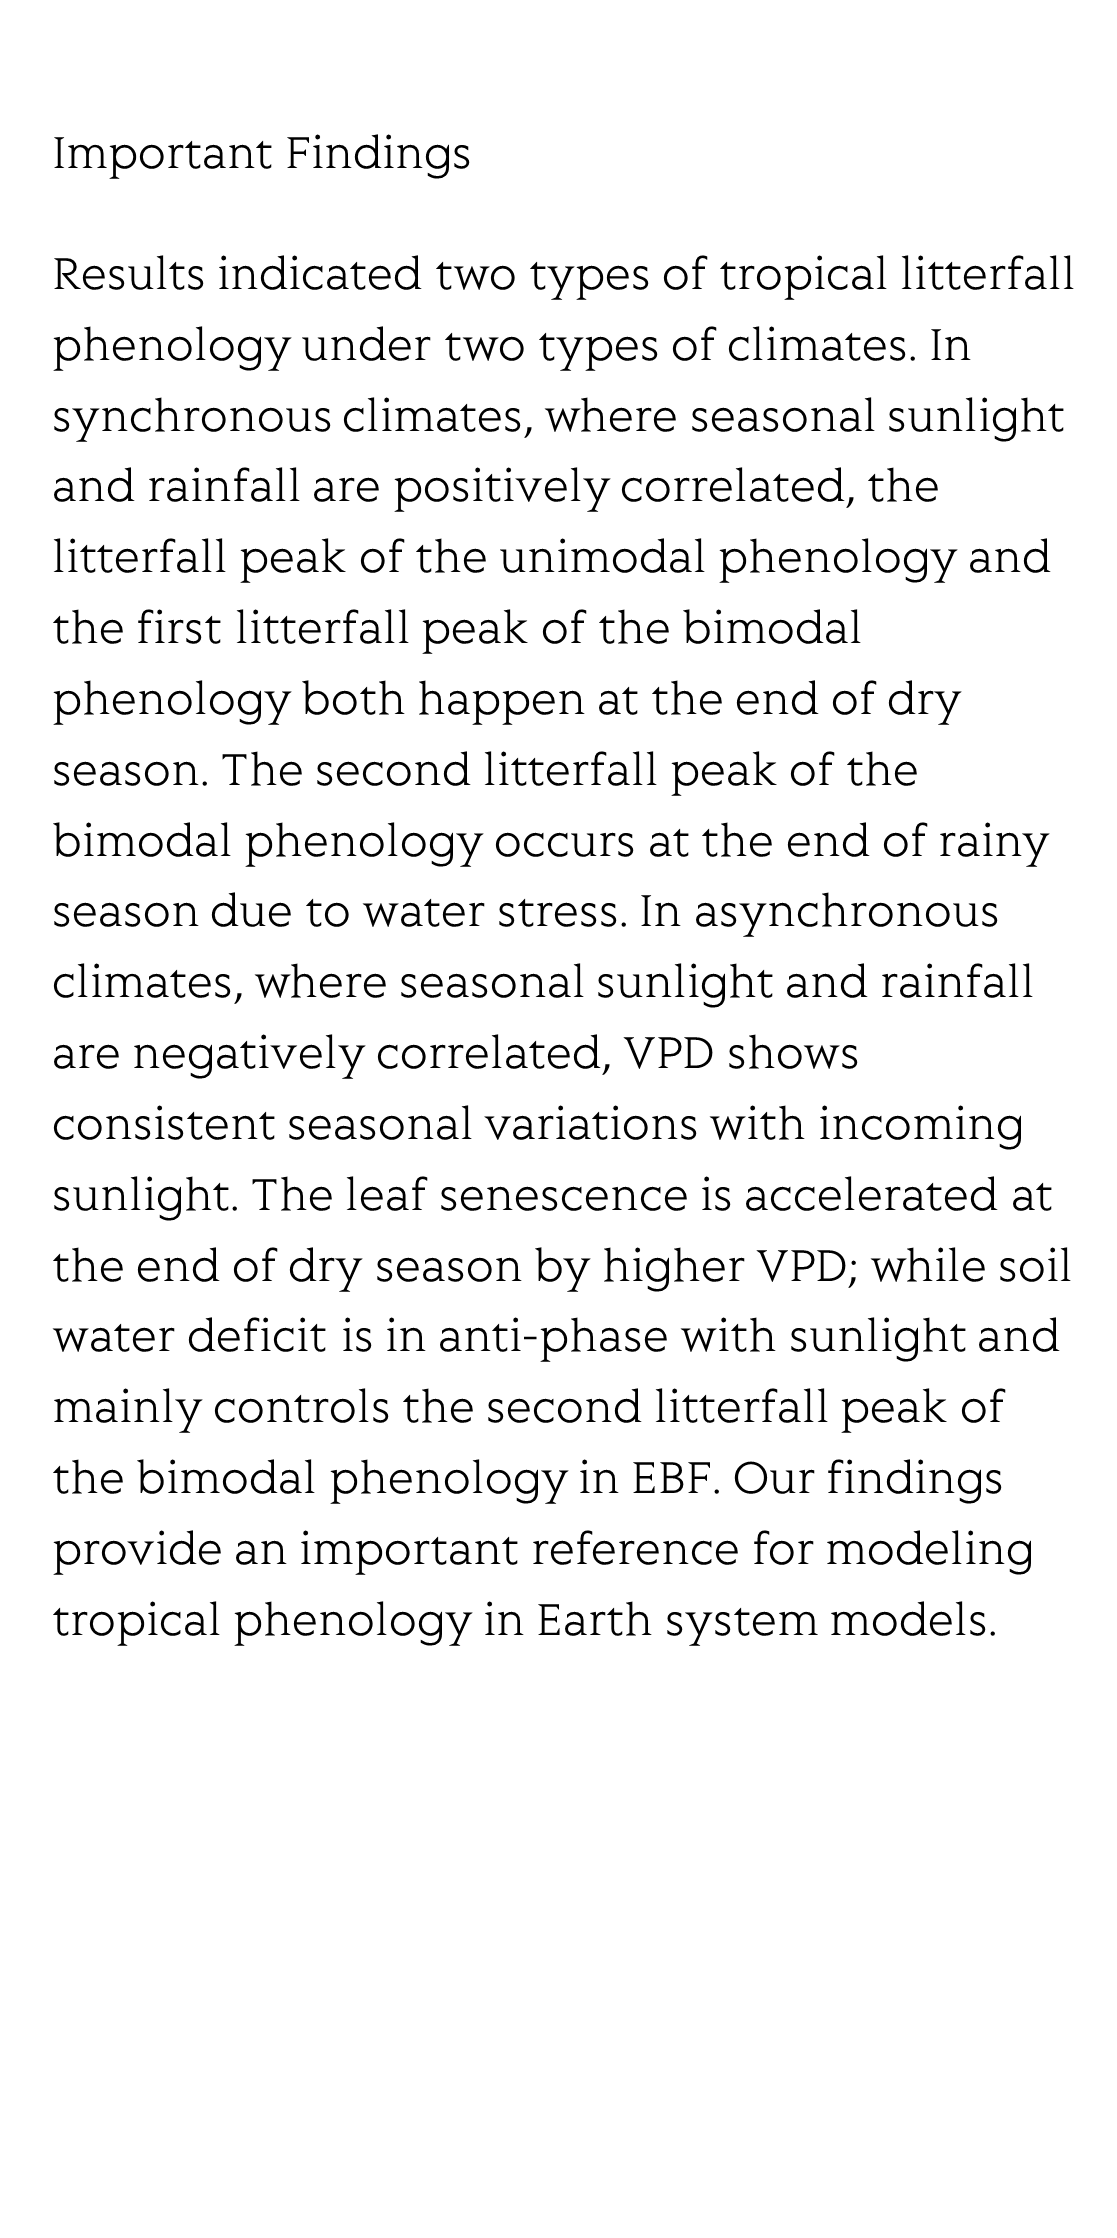 Litterfall seasonality and adaptive strategies of tropical and subtropical evergreen forests in China_3